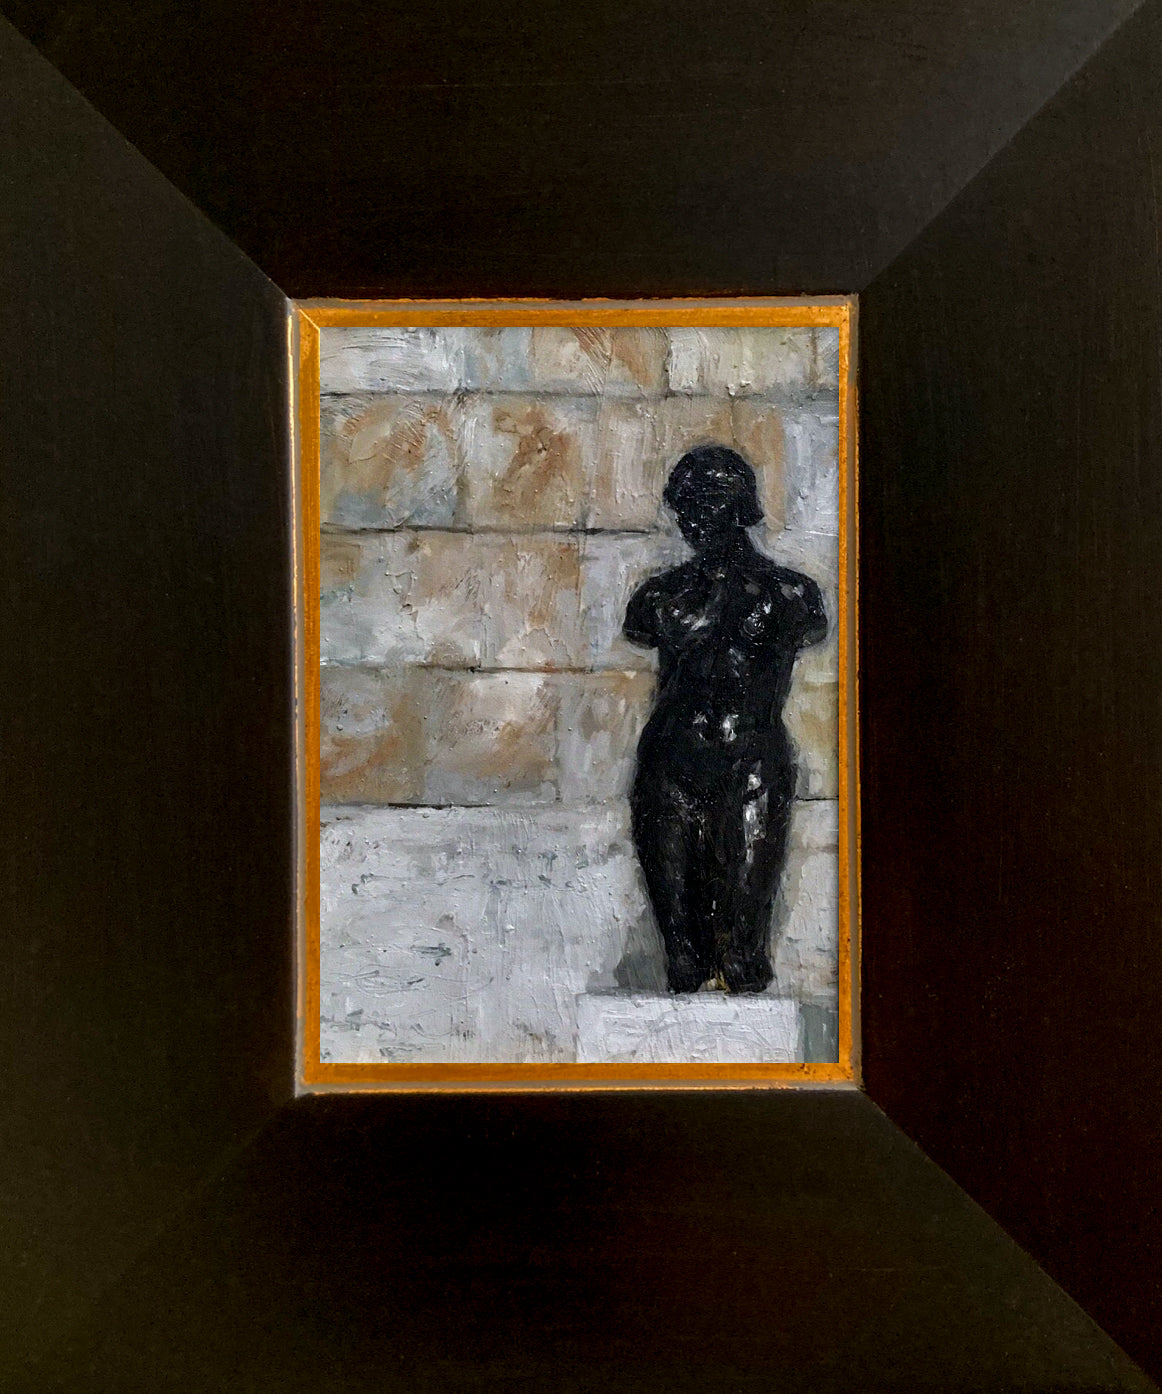 Oil painting of black statue figure against beige block wall titled 'The Axis' by E. E. Jacks with dark wood frame with gold trim